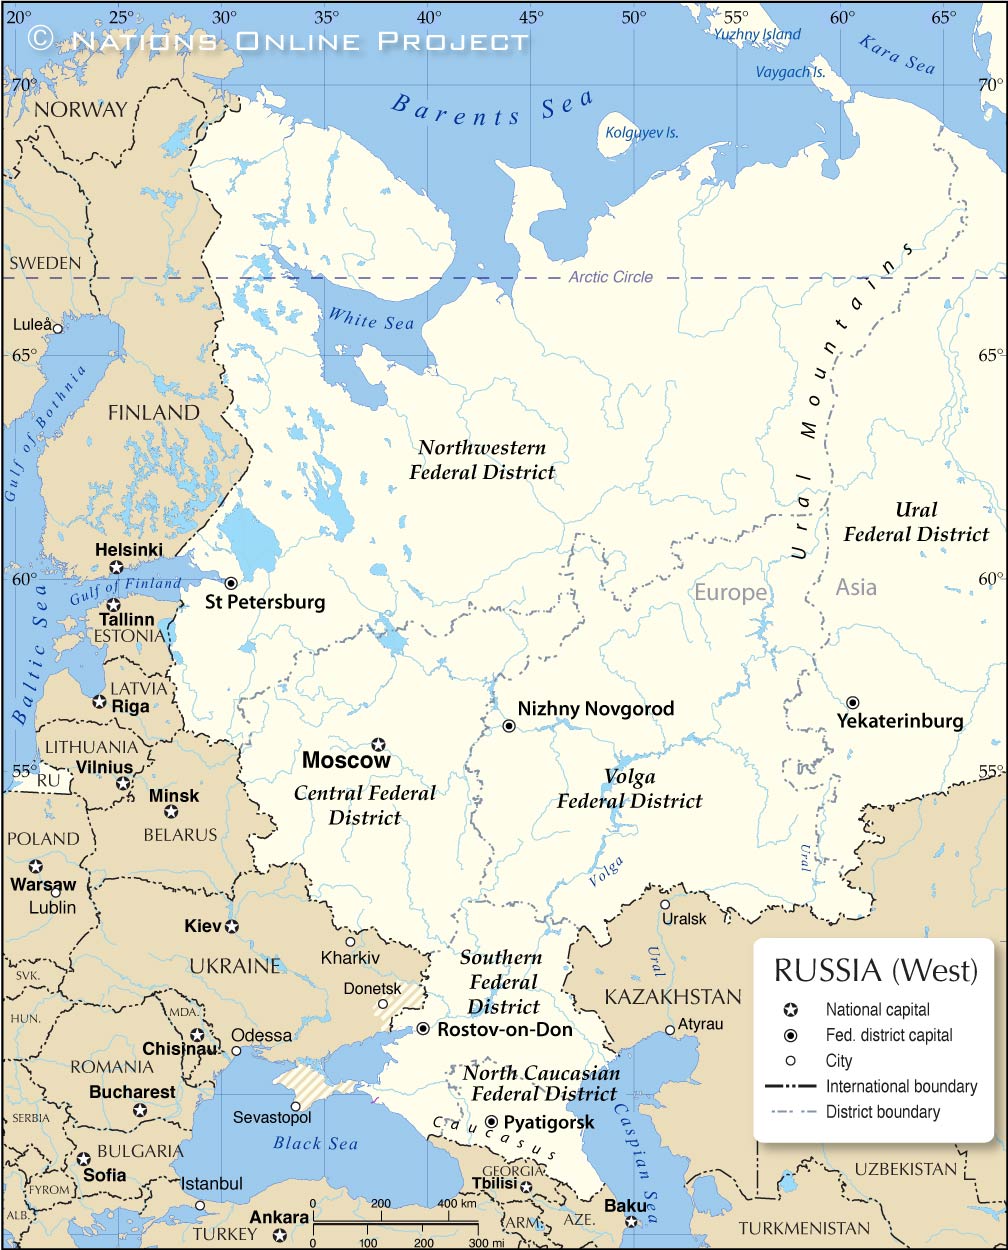 moscow on map of europe Map Of European Russia Nations Online Project moscow on map of europe